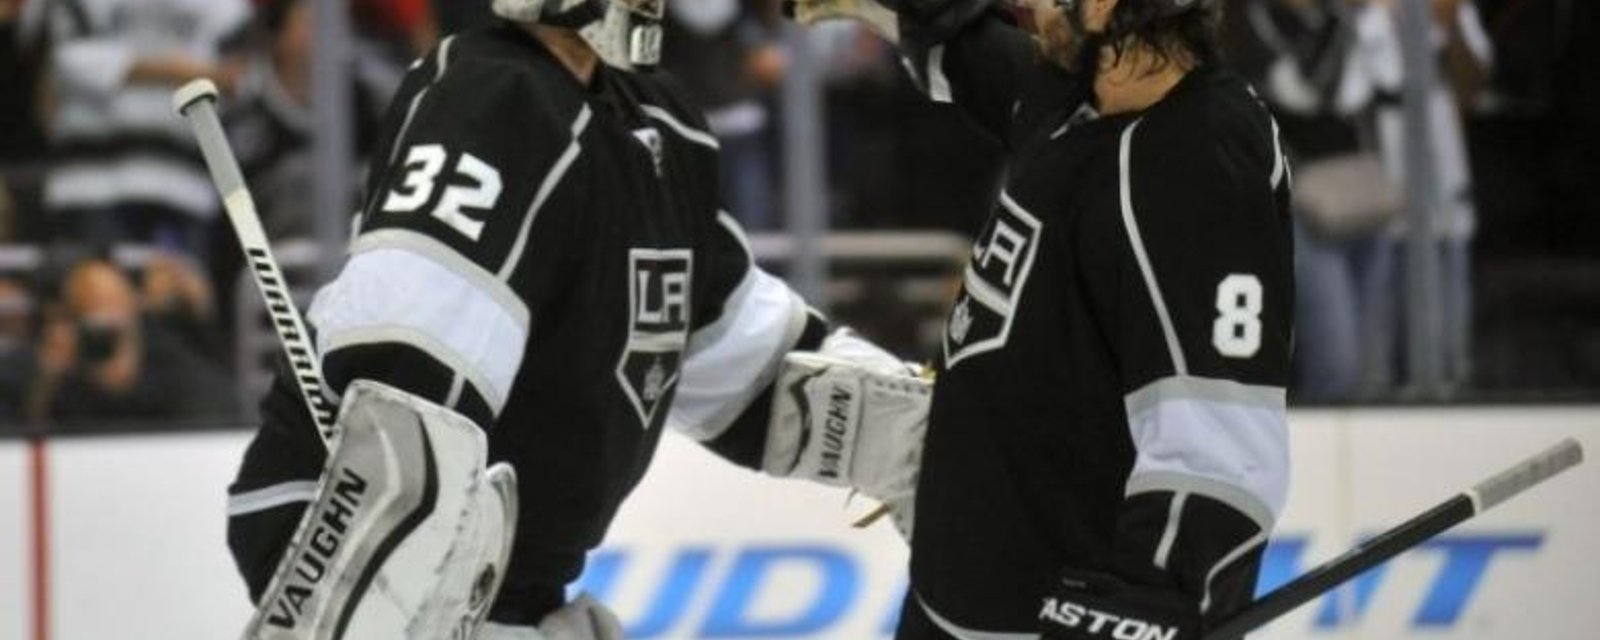 Doughty and Quick Leading the Kings with All-Star Caliber Play